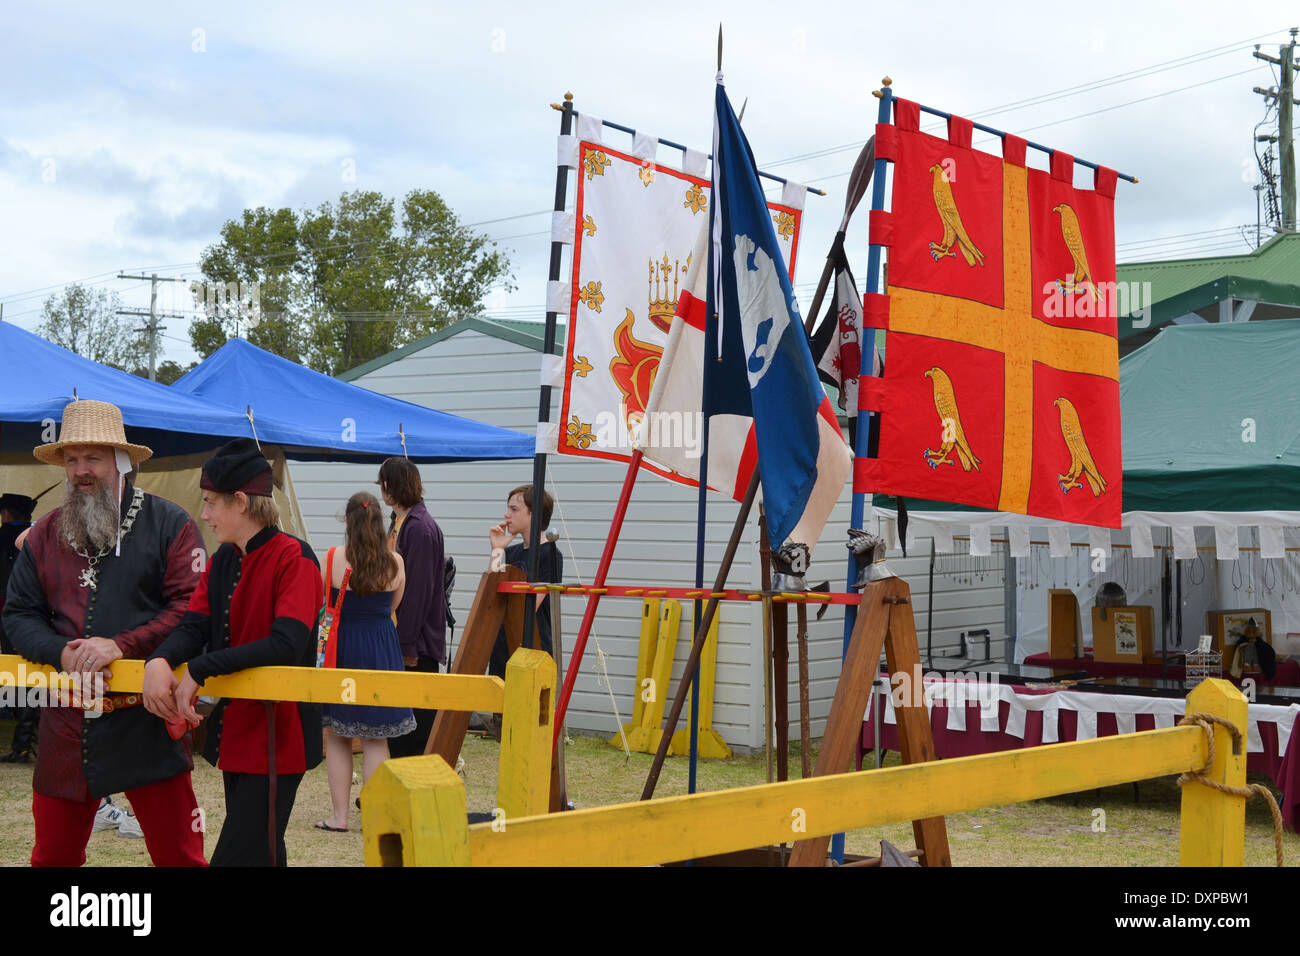 People watch a performance in front of family crest flags at medieval festival Stock Photo